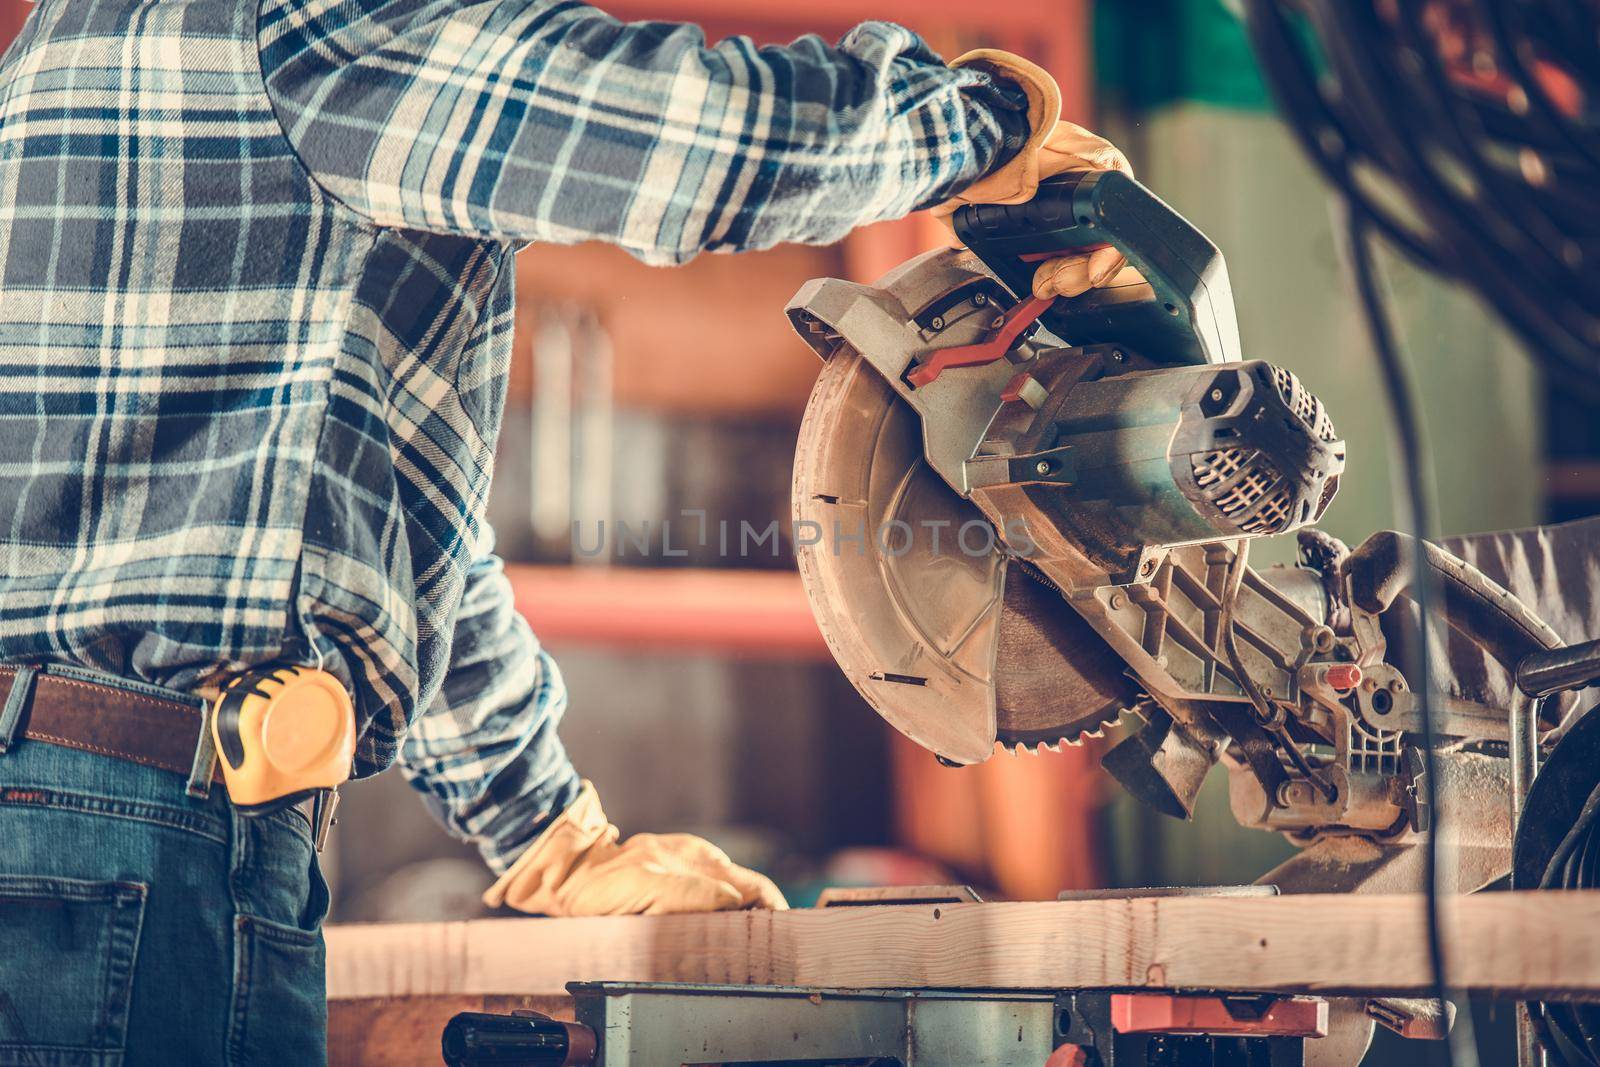 Wood Worker Using Powerful Circular Saw Close Up Photo. Construction Industry Theme.